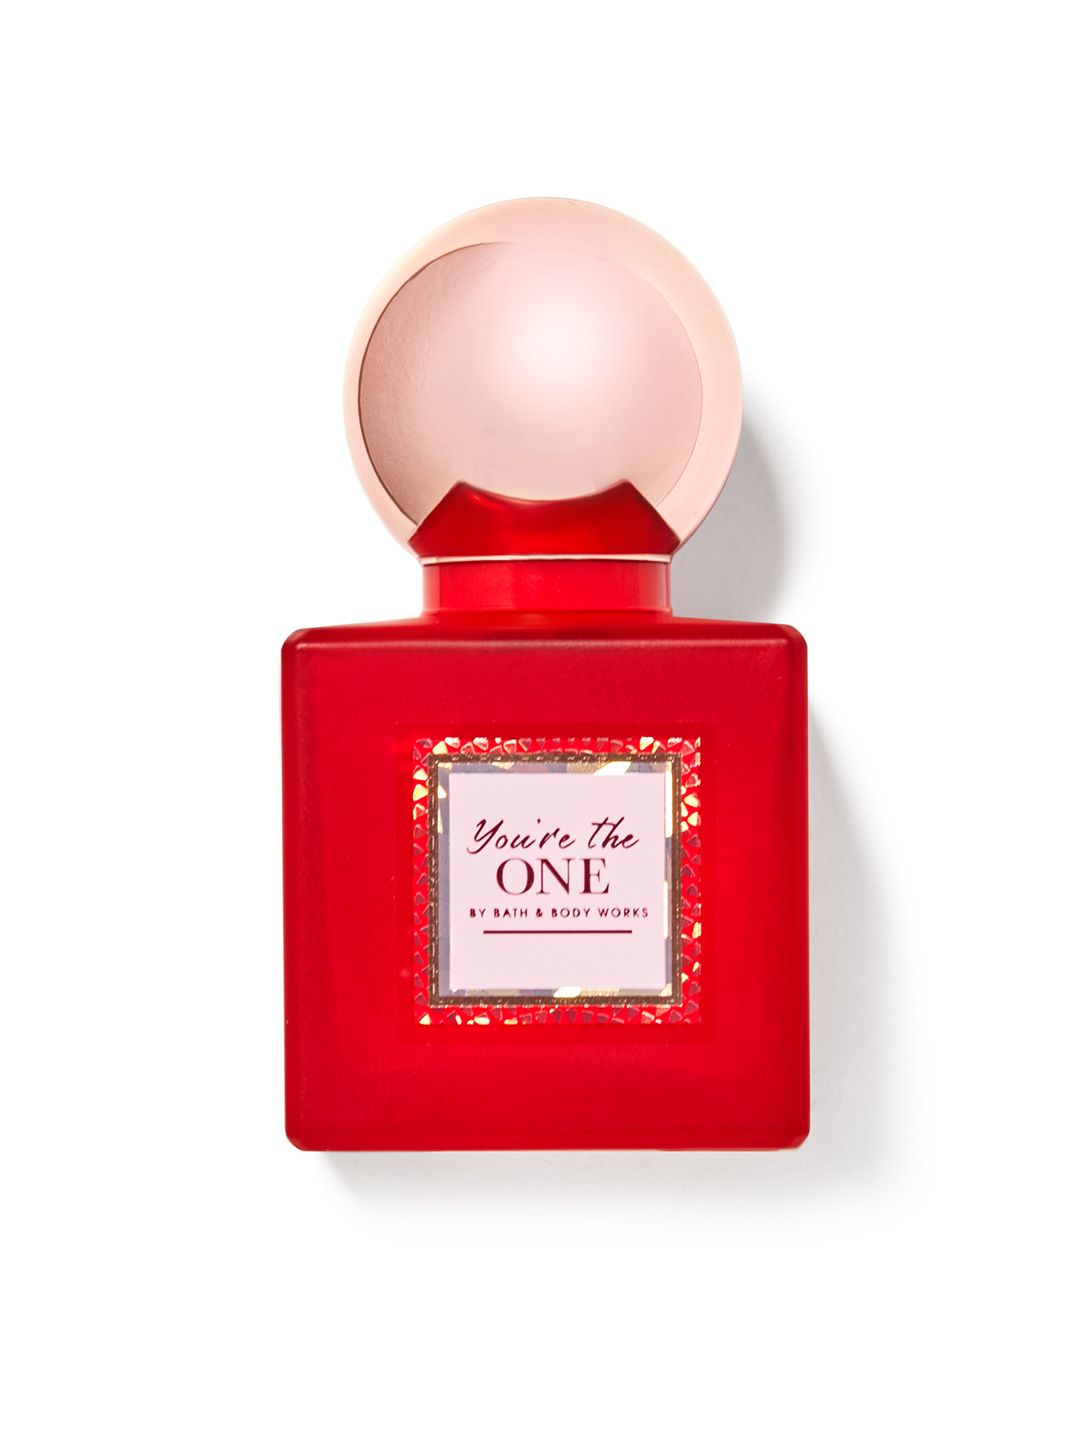 Bath & Body Works You're the One Eau de Parfum 50 ml Price in India